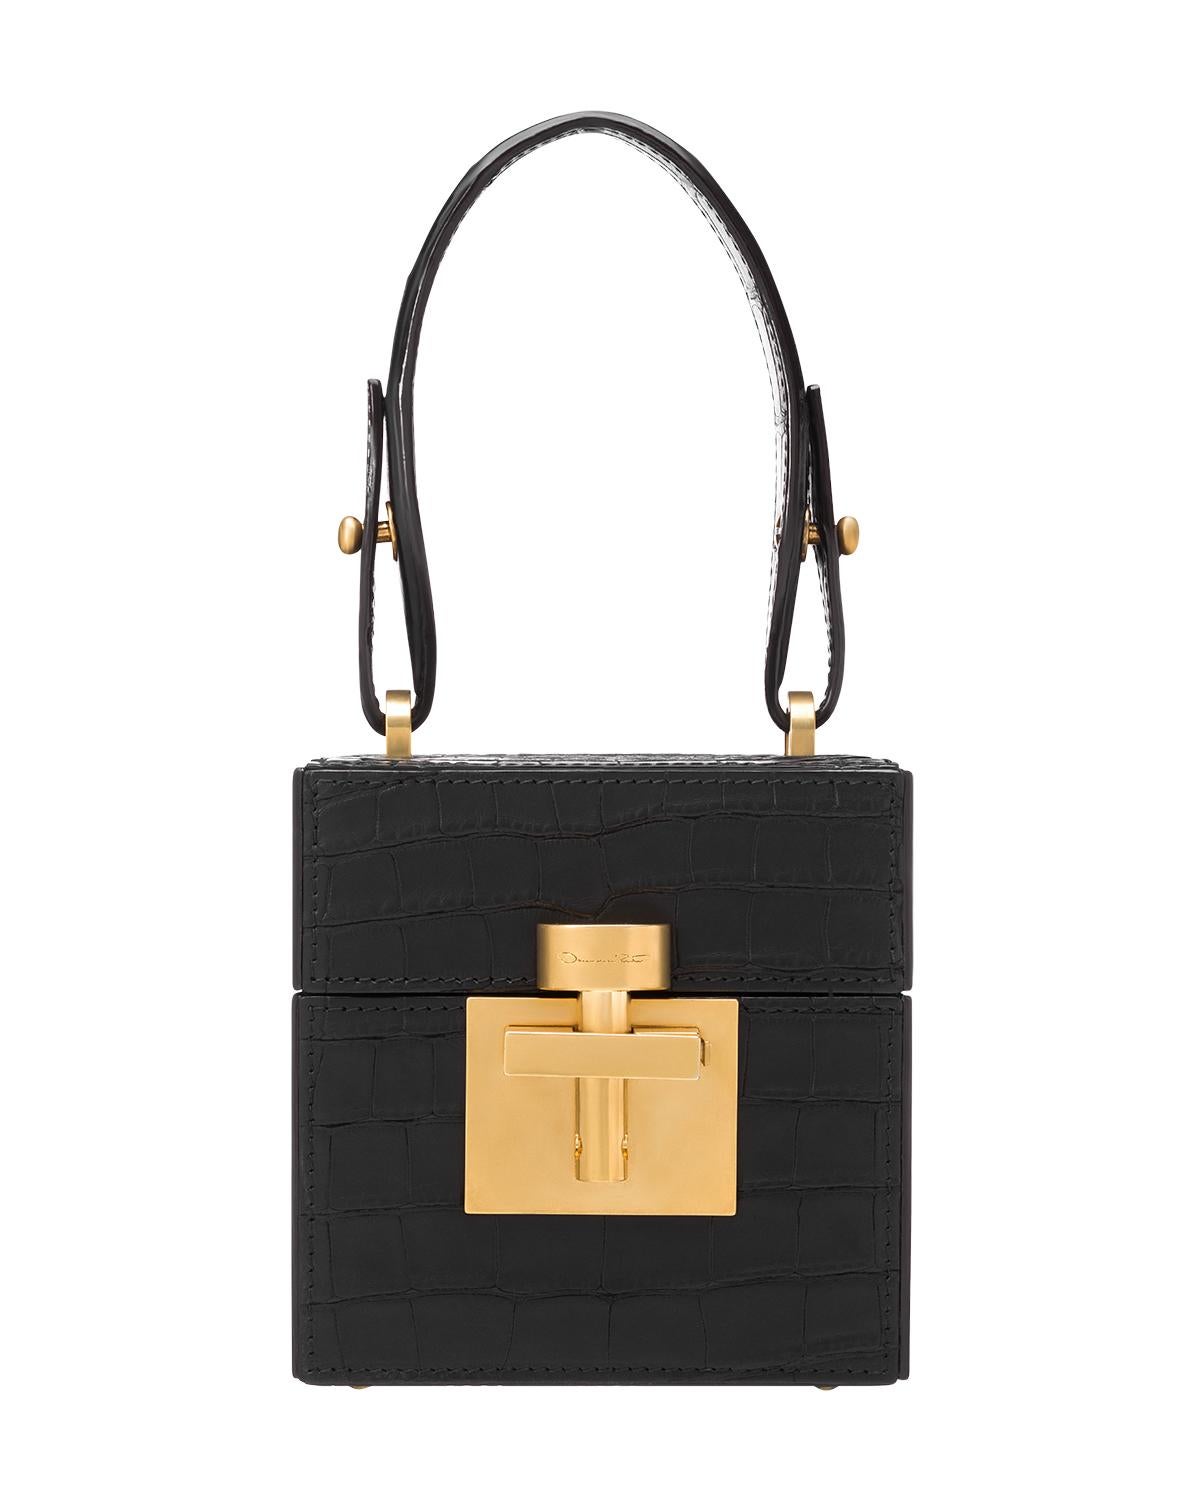 Oscar De La Renta
Brand New with Box & Tags
$9690
* Absolutely Stunning!
Black Genuine Alligator
Antiqued Gold-Tone Hardware
Flat Handle & Chain-Link Shoulder Strap
Suede Lining with Card Slot
Push-Lock Closure at Front

THE ALIBI CUBE IS CRAFTED